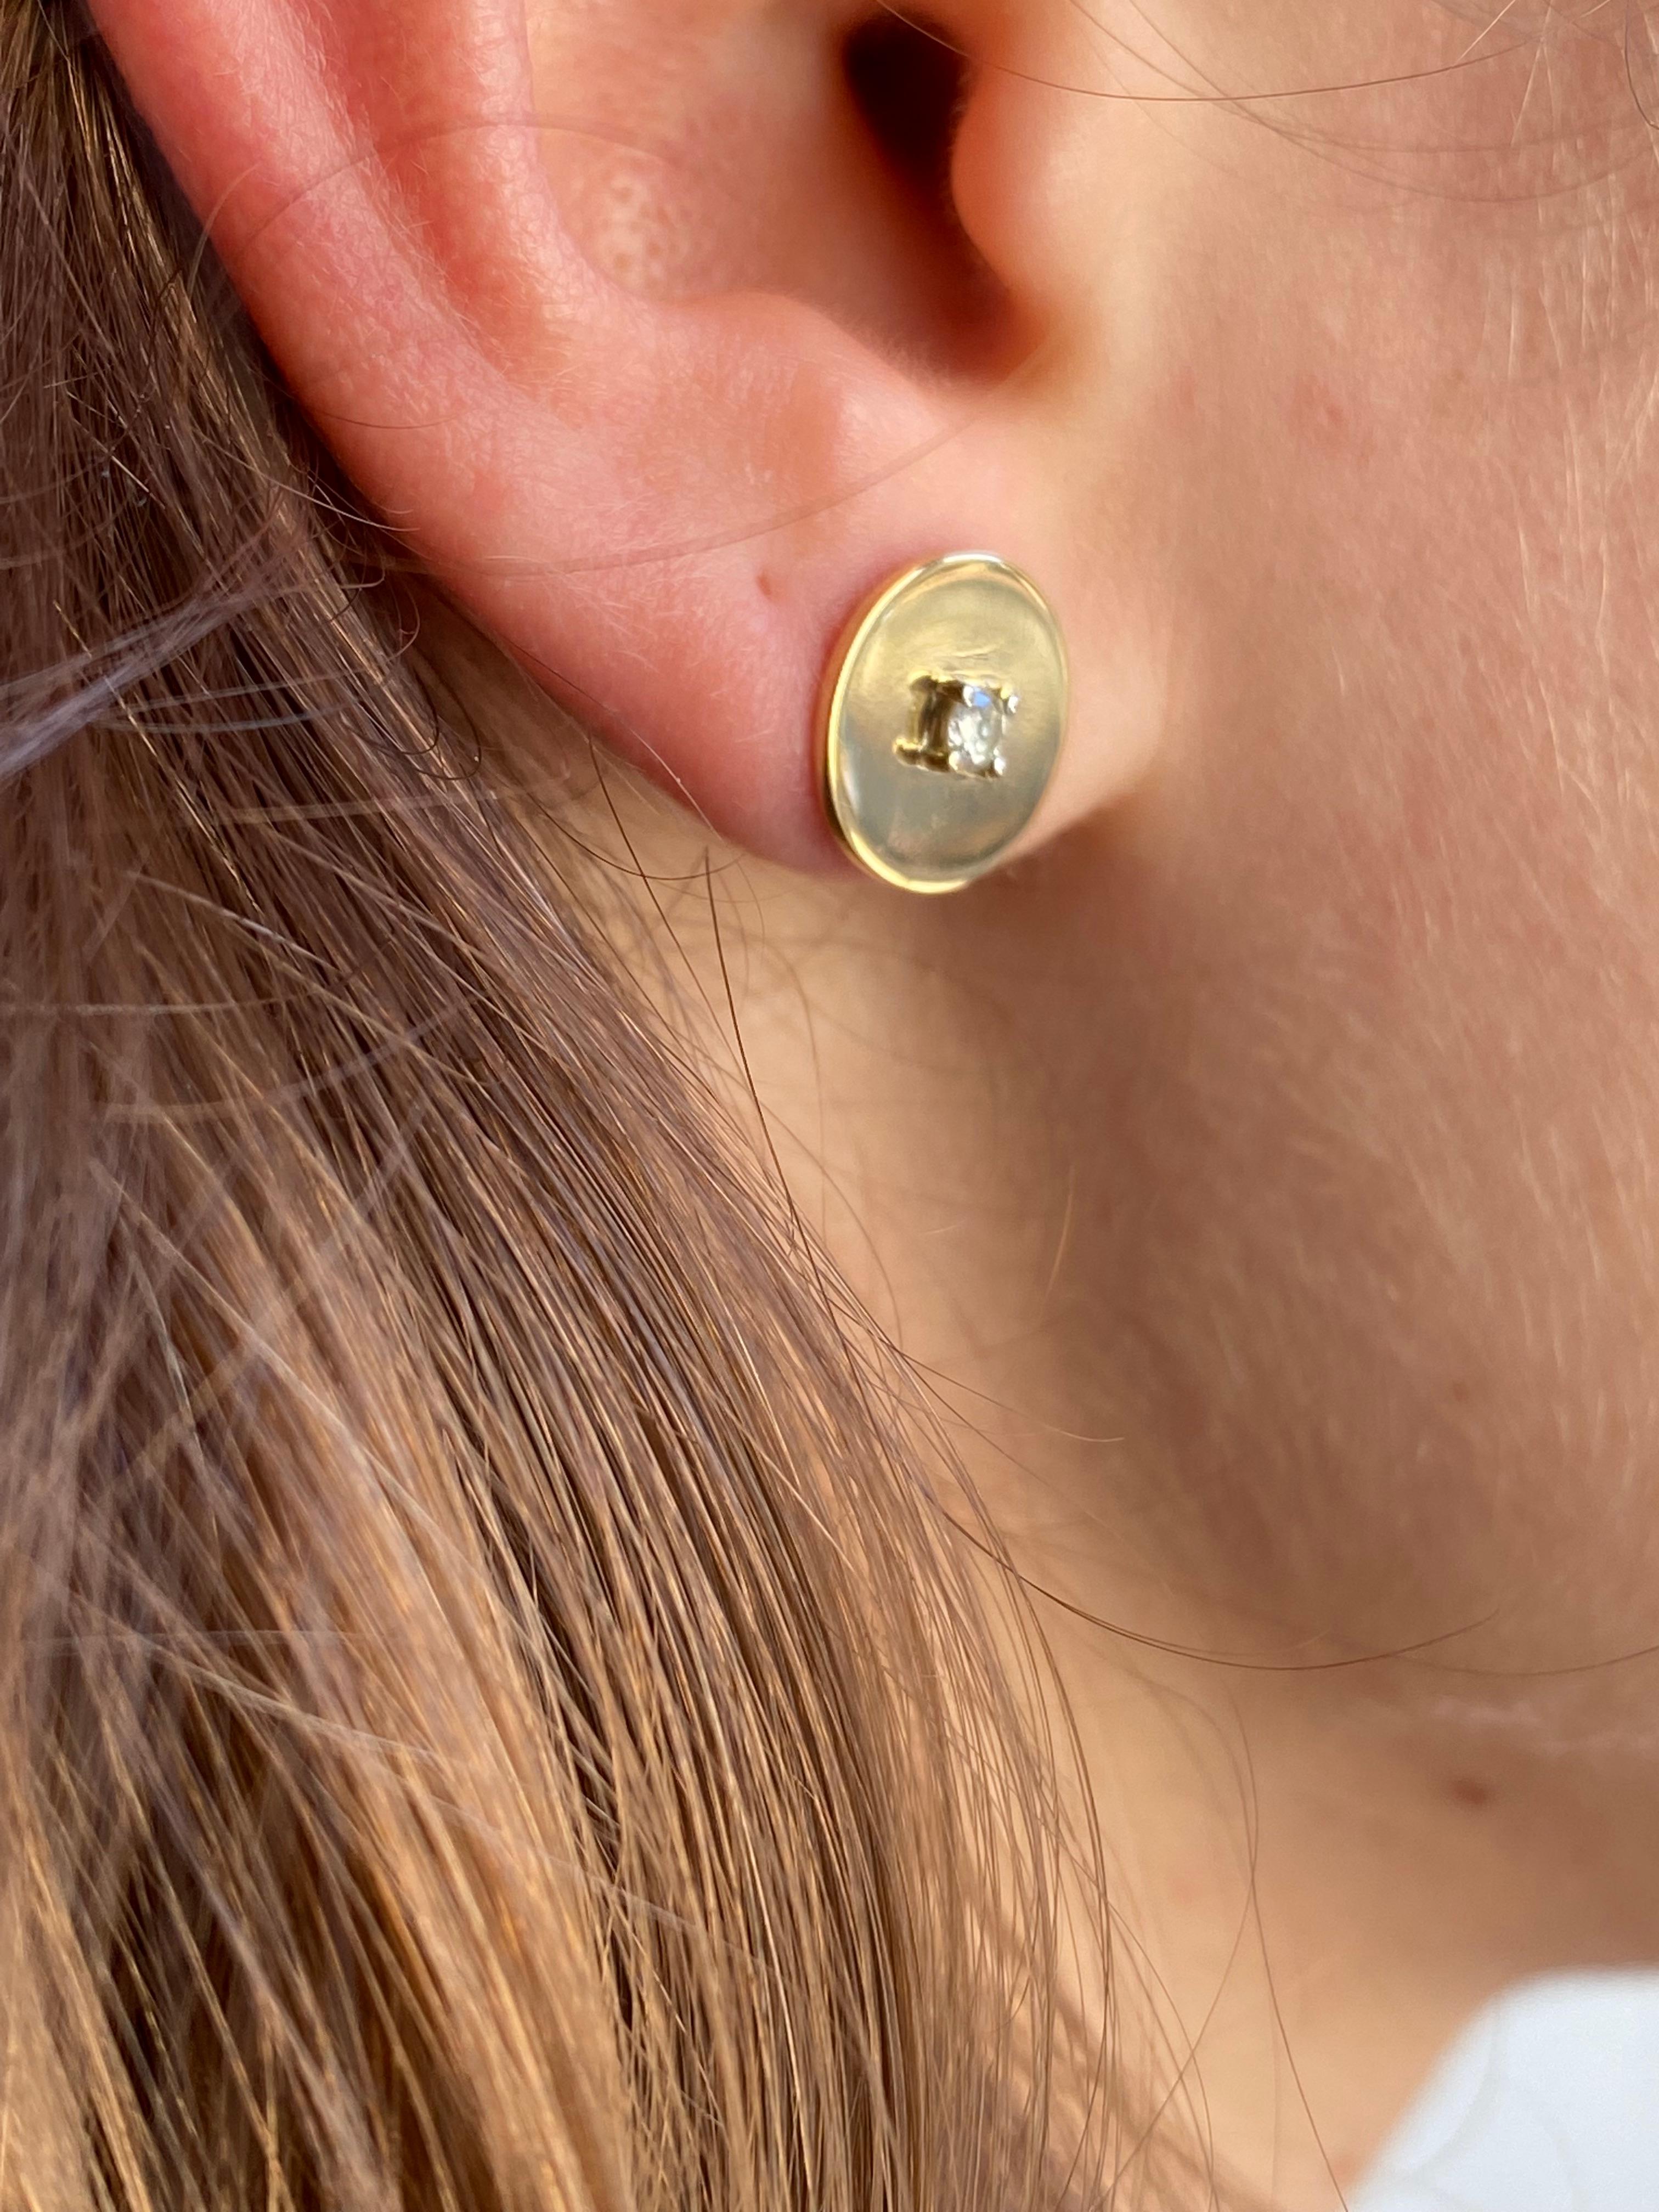 Rossella Ugolini Design Collection 18 Karat Yellow Gold Essential 0.14 Karats White Diamonds Dainty Modern Stud Unisex Earrings.
With their simple yet elegant design they fit every outfit: with one word they're just essential.
Dimension: Diameter